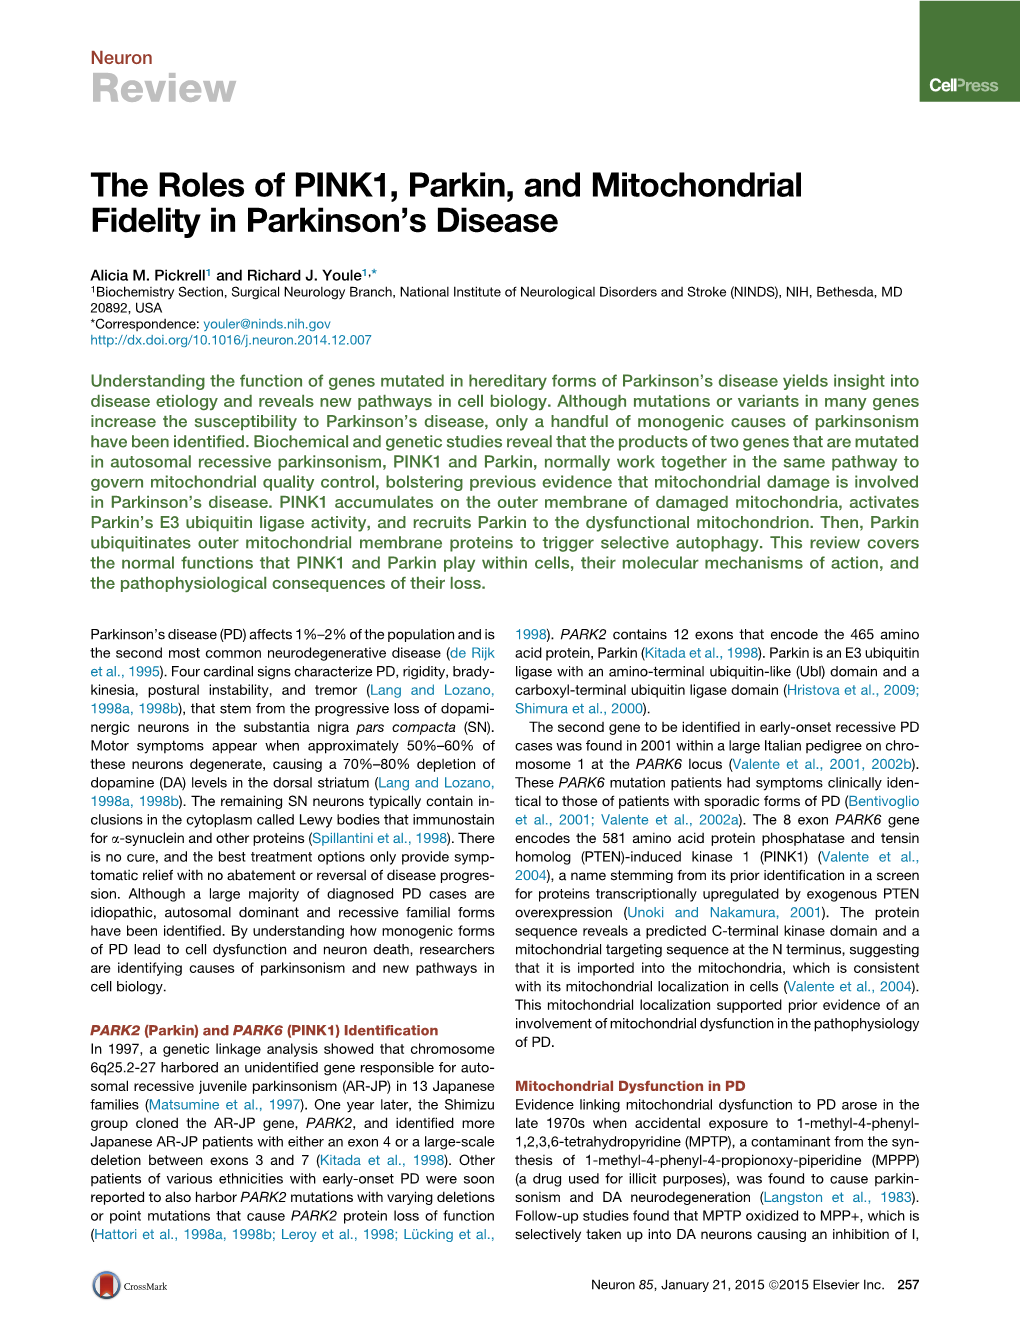 The Roles of PINK1, Parkin, and Mitochondrial Fidelity in Parkinson's